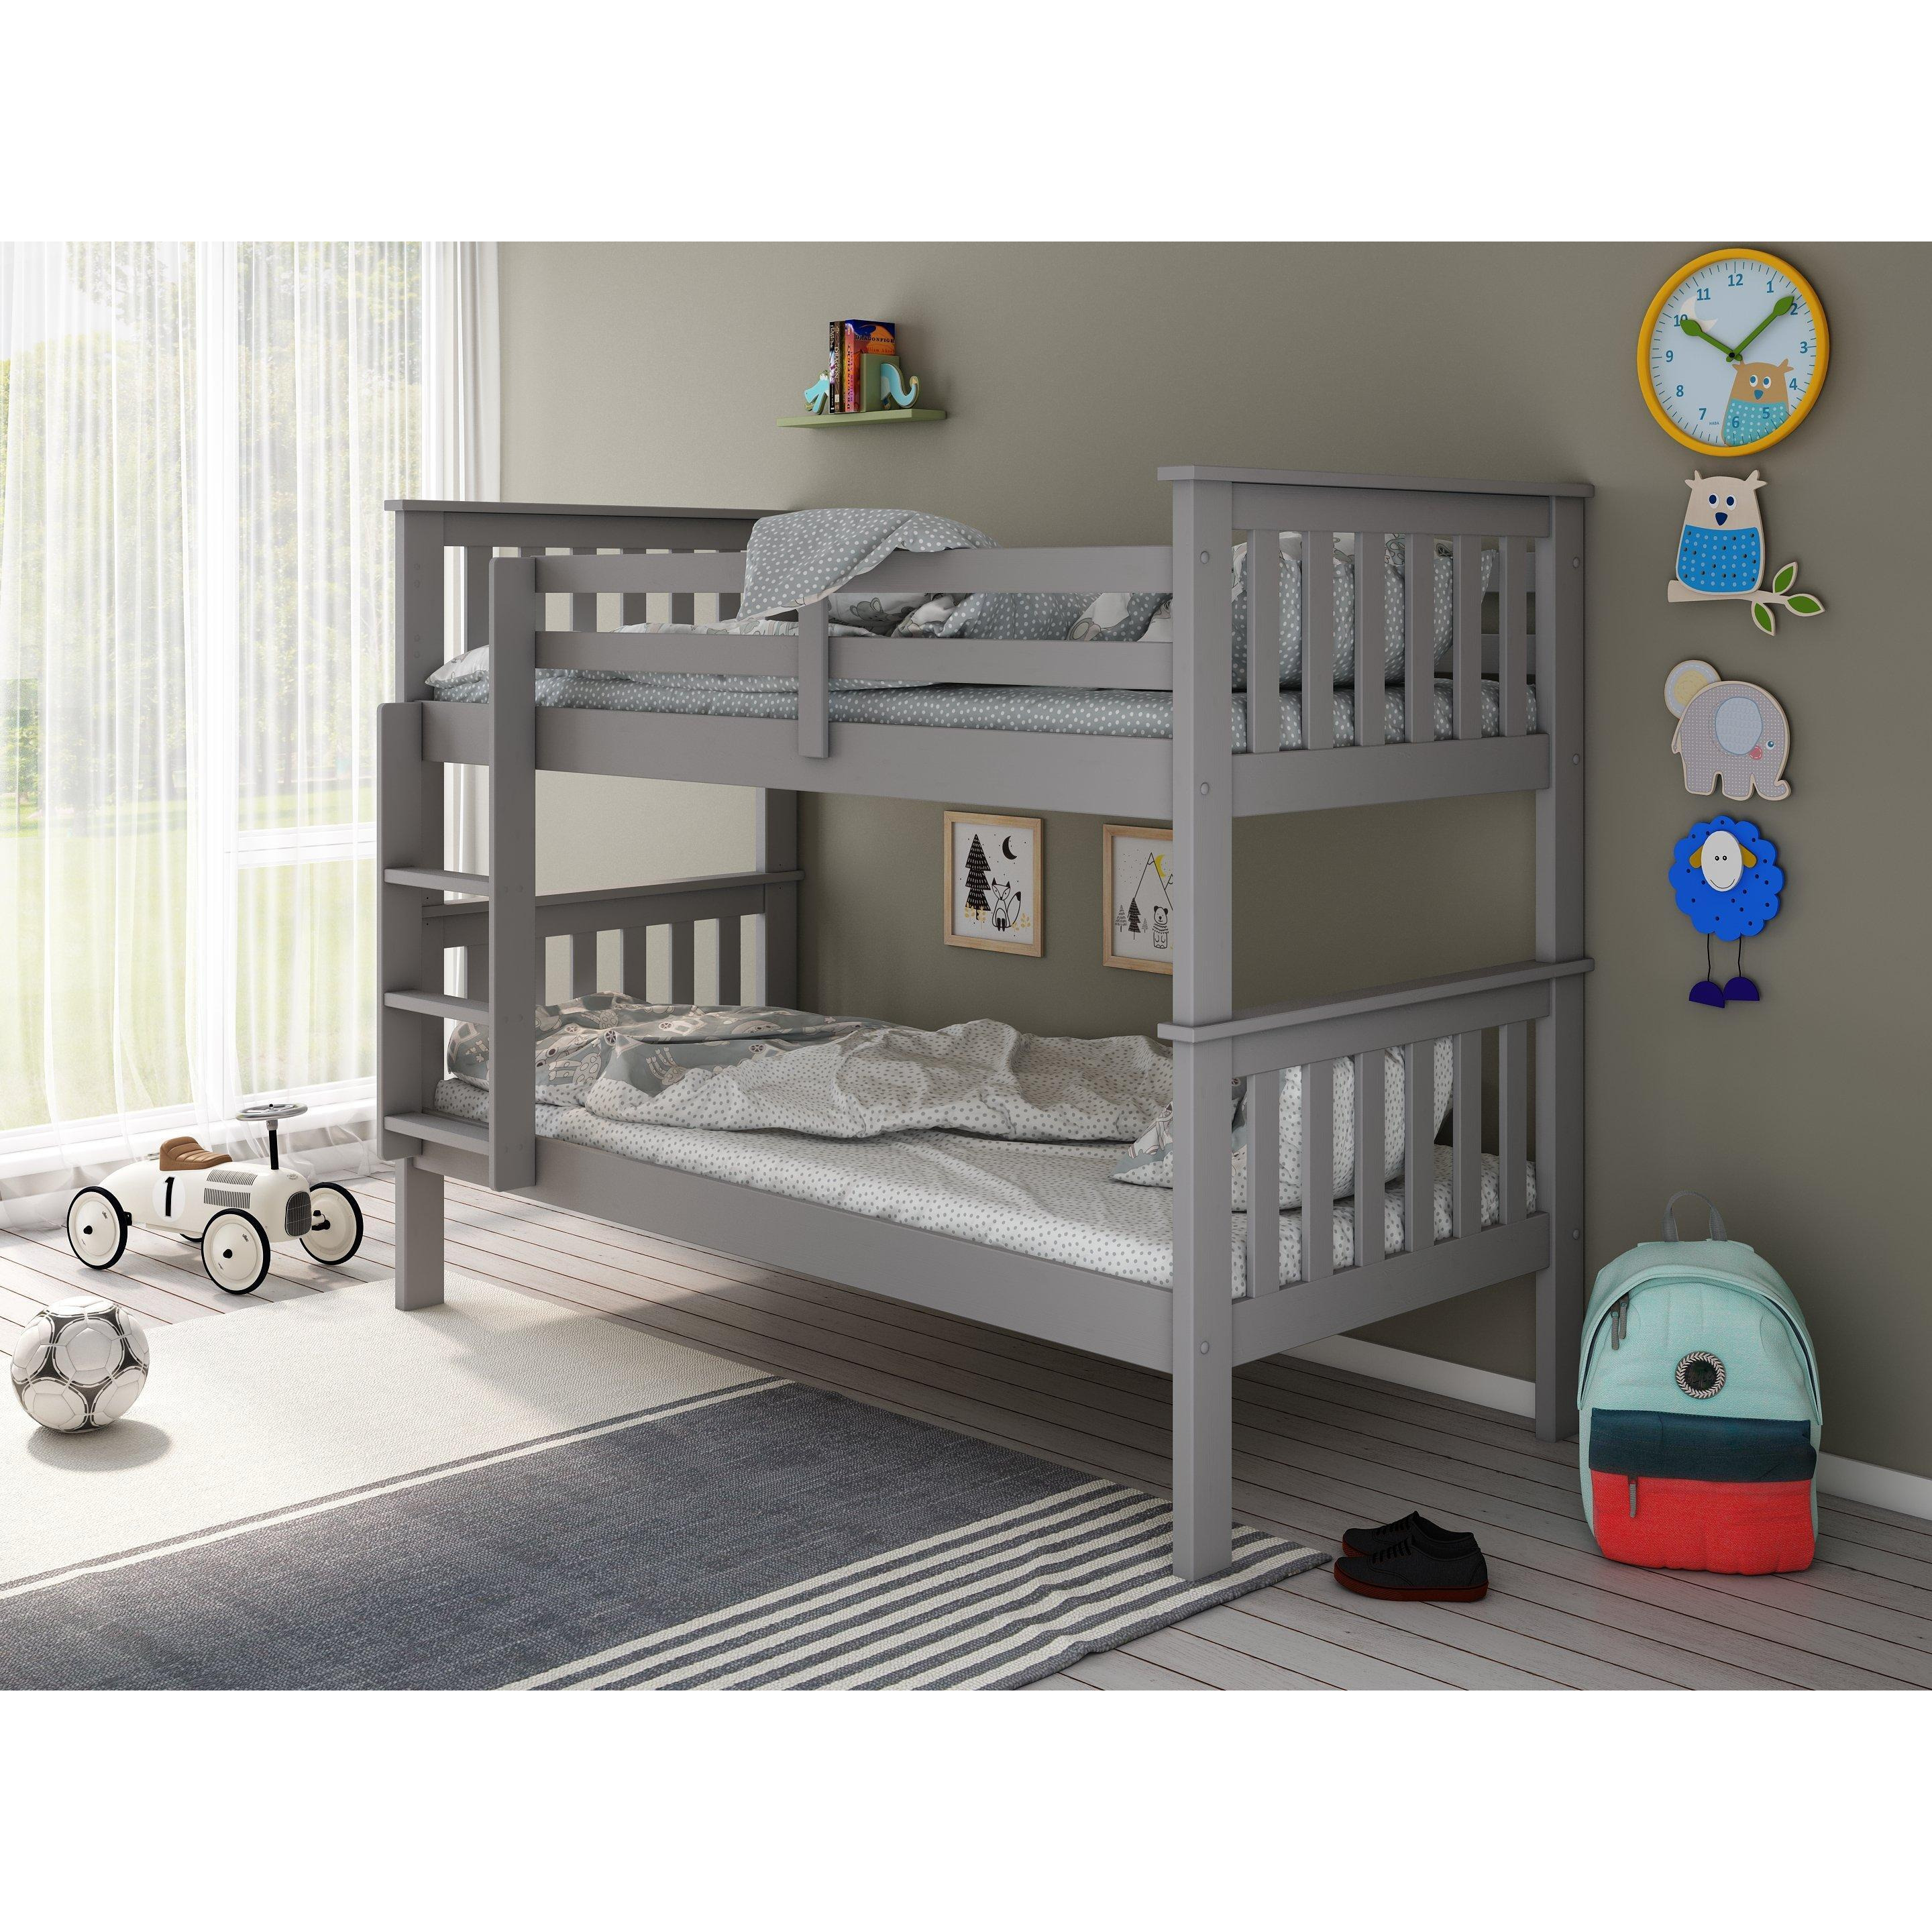 Carra Wooden Single Bunk Bed With Memory Foam Mattresses - image 1